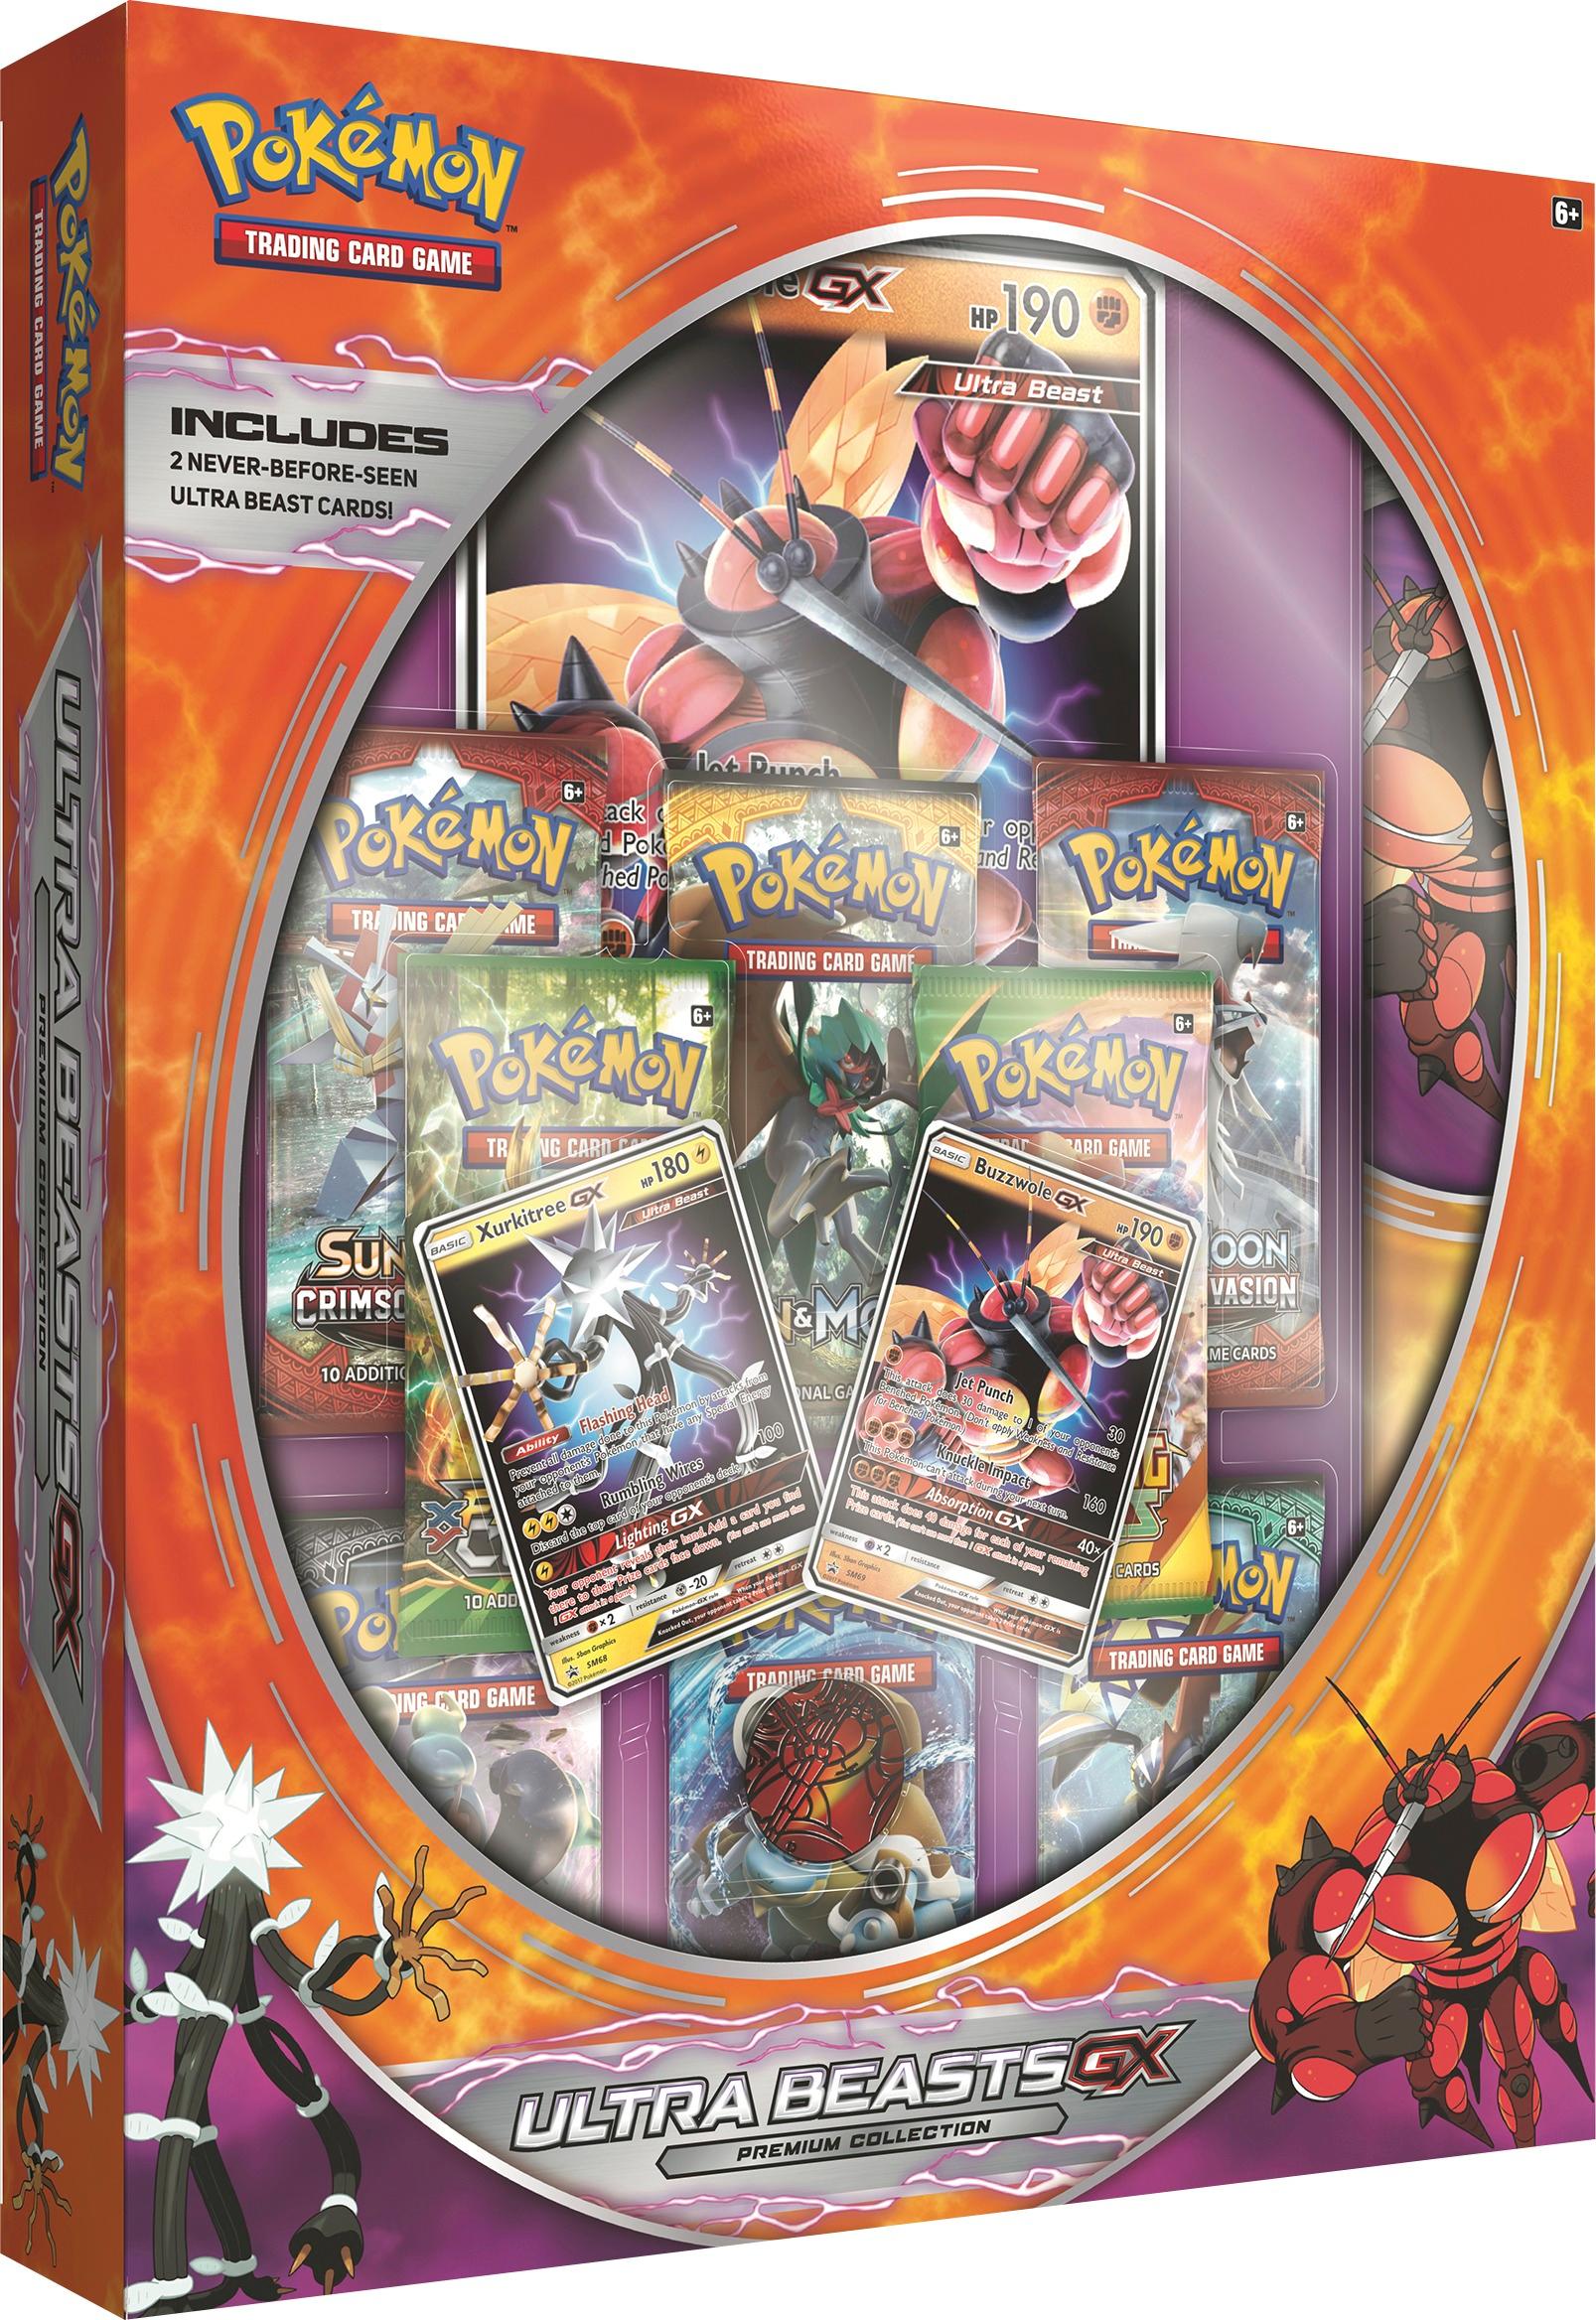 Pokémon - Ultra Beasts GX Premium Collection - Styles May Vary